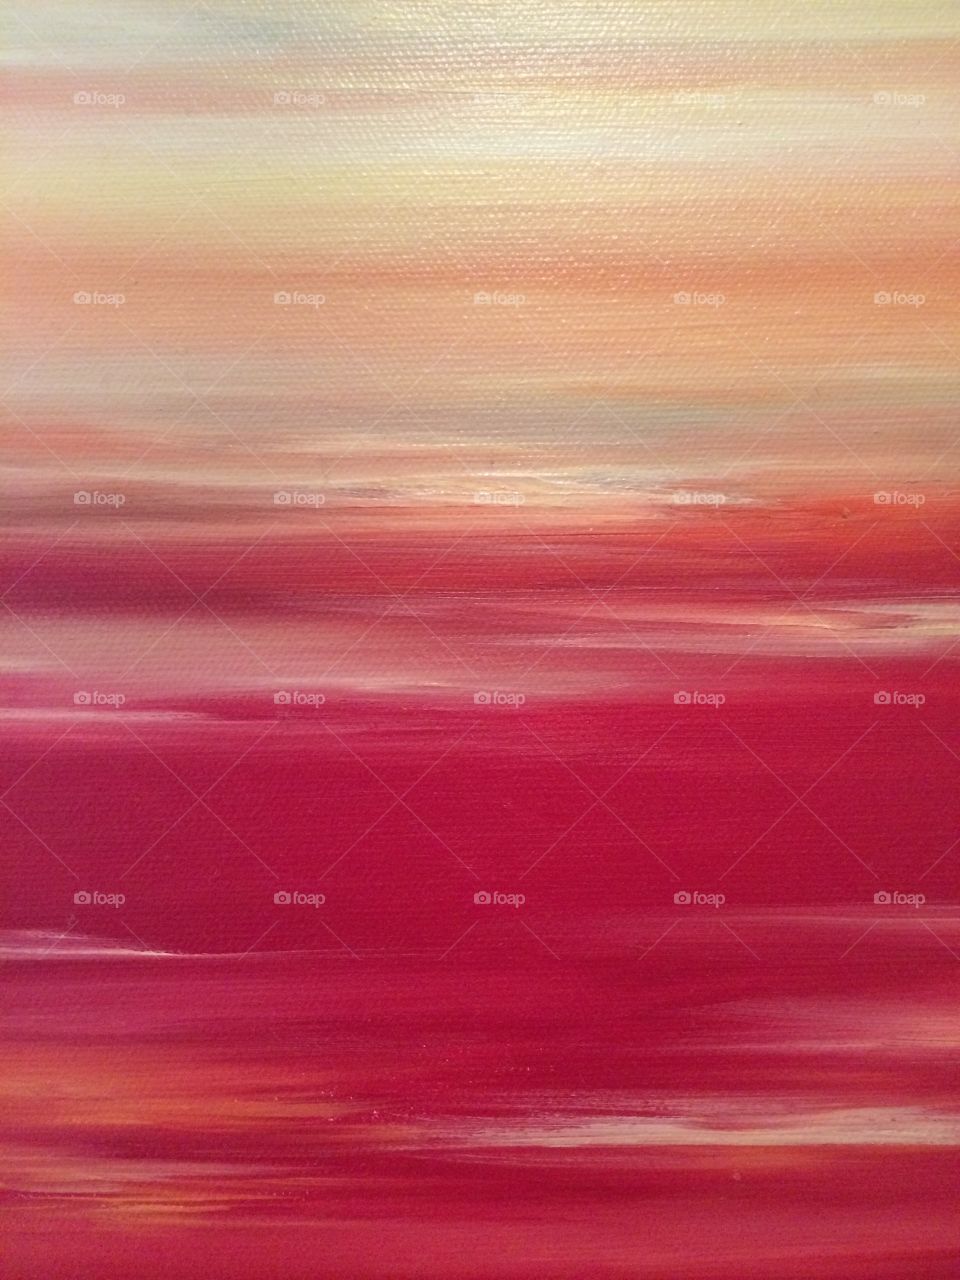 Red Sky of the Orient. Layered painting by a family member, gifted to me, showing a scarlet sky evocative of Asia.